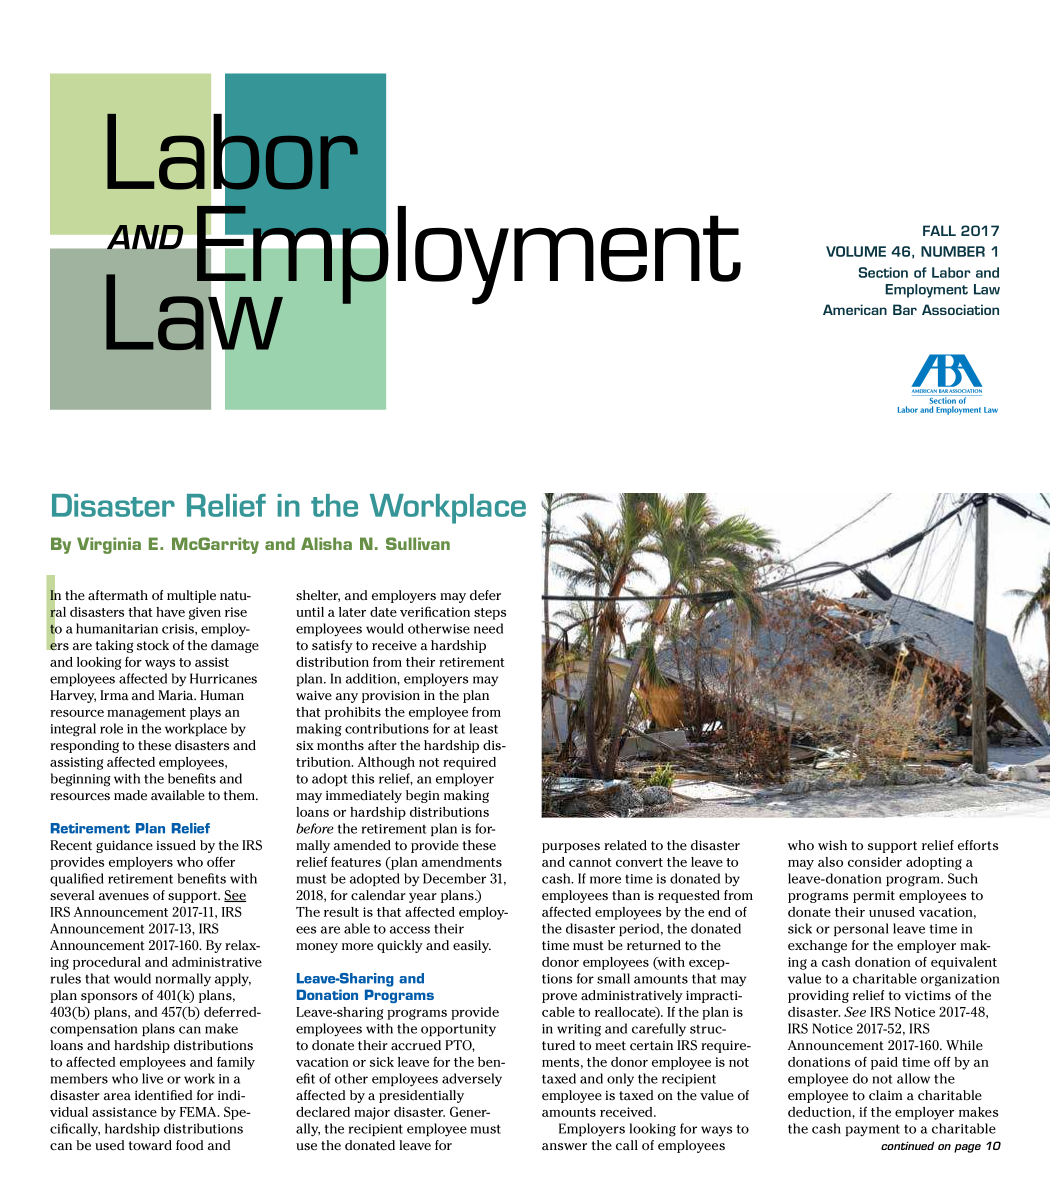 handle is hein.journals/laboemplo46 and id is 1 raw text is: 

















loyment


              FALL  2017
VOLUME 46, NUMBER 1
     Section of Labor and
         Employment   Law
American  Bar Association


    Section of
Labor and Employment Law


   isaster Relief i                  the      Workplae

By  Virginia  E. McGarrity and Alisha N. Sullivan


hi the aftermath of multiple natu-
ral disasters that have given rise
to a humanitarian crisis, employ-
ers are taking stock of the damage
and looking for ways to assist
employees affected by Hurricanes
Harvey, Irma and Maria. Human
resource management plays an
integral role in the workplace by
responding to these disasters and
assisting affected employees,
beginning with the benefits and
resources made available to them.

Retirement  Plan Relief
Recent guidance issued by the IRS
provides employers who offer
qualified retirement benefits with
several avenues of support. See
IRS Announcement  2017-11, IRS
Announcement  2017-13, IRS
Announcement  2017-160. By relax-
ing procedural and administrative
rules that would normally apply,
plan sponsors of 401(k) plans,
403(b) plans, and 457(b) deferred-
compensation plans can make
loans and hardship distributions
to affected employees and family
members  who live or work in a
disaster area identified for indi-
vidual assistance by FEMA. Spe-
cifically, hardship distributions
can be used toward food and


shelter, and employers may defer
until a later date verification steps
employees would otherwise need
to satisfy to receive a hardship
distribution from their retirement
plan. In addition, employers may
waive any provision in the plan
that prohibits the employee from
making contributions for at least
six months after the hardship dis-
tribution. Although not required
to adopt this relief, an employer
may immediately begin making
loans or hardship distributions
before the retirement plan is for-
mally amended to provide these
relief features (plan amendments
must be adopted by December 31,
2018, for calendar year plans.)
The result is that affected employ-
ees are able to access their
money  more quickly and easily.

Leave-Sharing  and
Donation  Programs
Leave-sharing programs provide
employees with the opportunity
to donate their accrued PTO,
vacation or sick leave for the ben-
efit of other employees adversely
affected by a presidentially
declared major disaster. Gener-
ally, the recipient employee must
use the donated leave for


purposes related to the disaster
and cannot convert the leave to
cash. If more time is donated by
employees than is requested from
affected employees by the end of
the disaster period, the donated
time must be returned to the
donor employees (with excep-
tions for small amounts that may
prove administratively impracti-
cable to reallocate). If the plan is
in writing and carefully struc-
tured to meet certain IRS require-
ments, the donor employee is not
taxed and only the recipient
employee is taxed on the value of
amounts received.
  Employers  looking for ways to
answer the call of employees


who wish to support relief efforts
may also consider adopting a
leave-donation program. Such
programs permit employees to
donate their unused vacation,
sick or personal leave time in
exchange for the employer mak-
ing a cash donation of equivalent
value to a charitable organization
providing relief to victims of the
disaster. See IRS Notice 2017-48,
IRS Notice 2017-52, IRS
Announcement  2017-160. While
donations of paid time off by an
employee do not allow the
employee to claim a charitable
deduction, if the employer makes
the cash payment to a charitable
             continued on page 10


